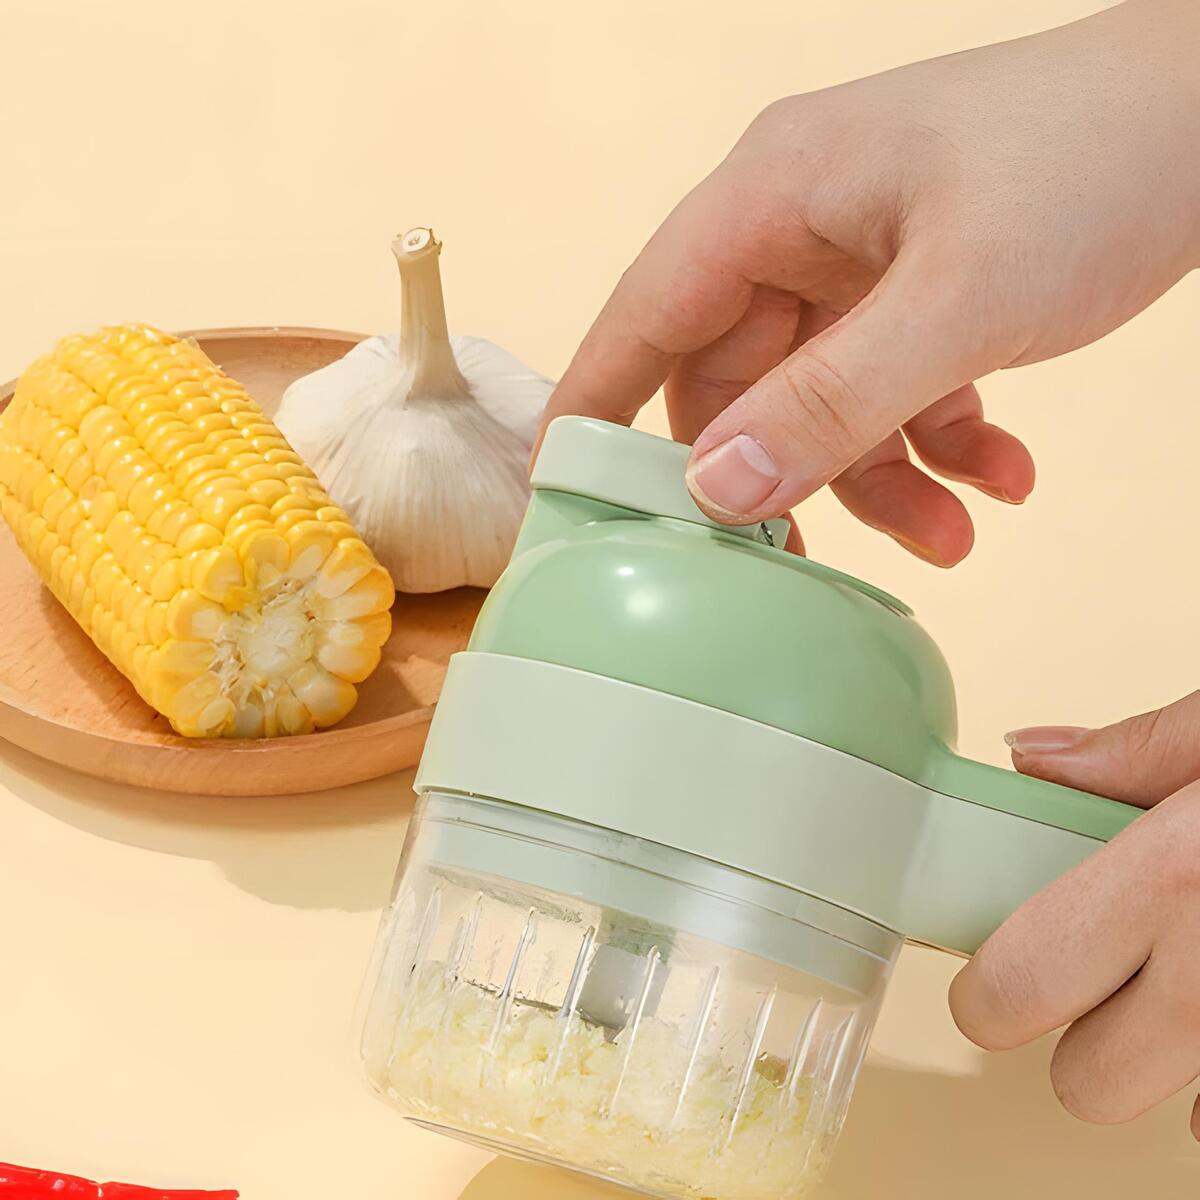 Upgraded Electric Food Chopper- 4 In 1 Portable Electric Vegetable